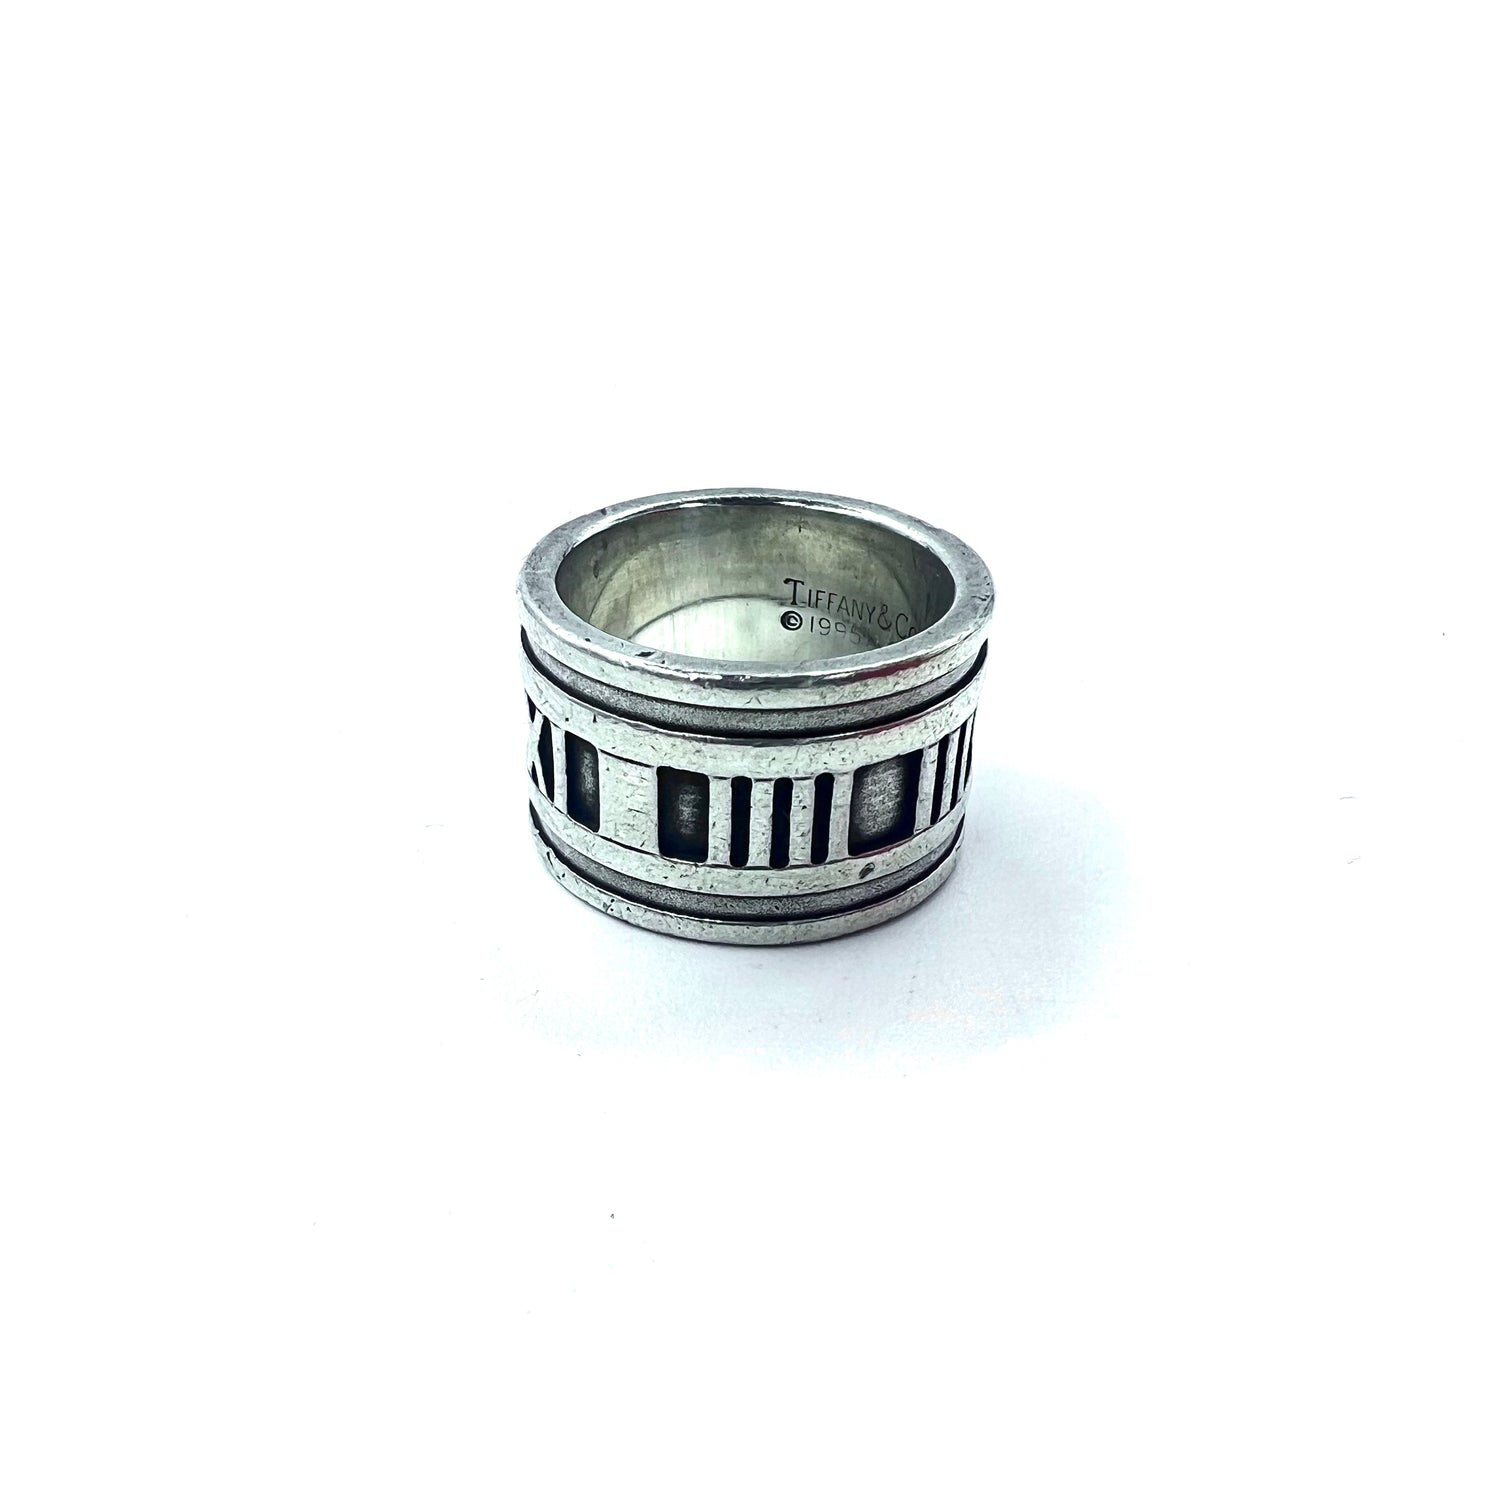 TIFFANY & CO. Atlas wide ring ring No. 9 Silver Silver 925 Pinky 